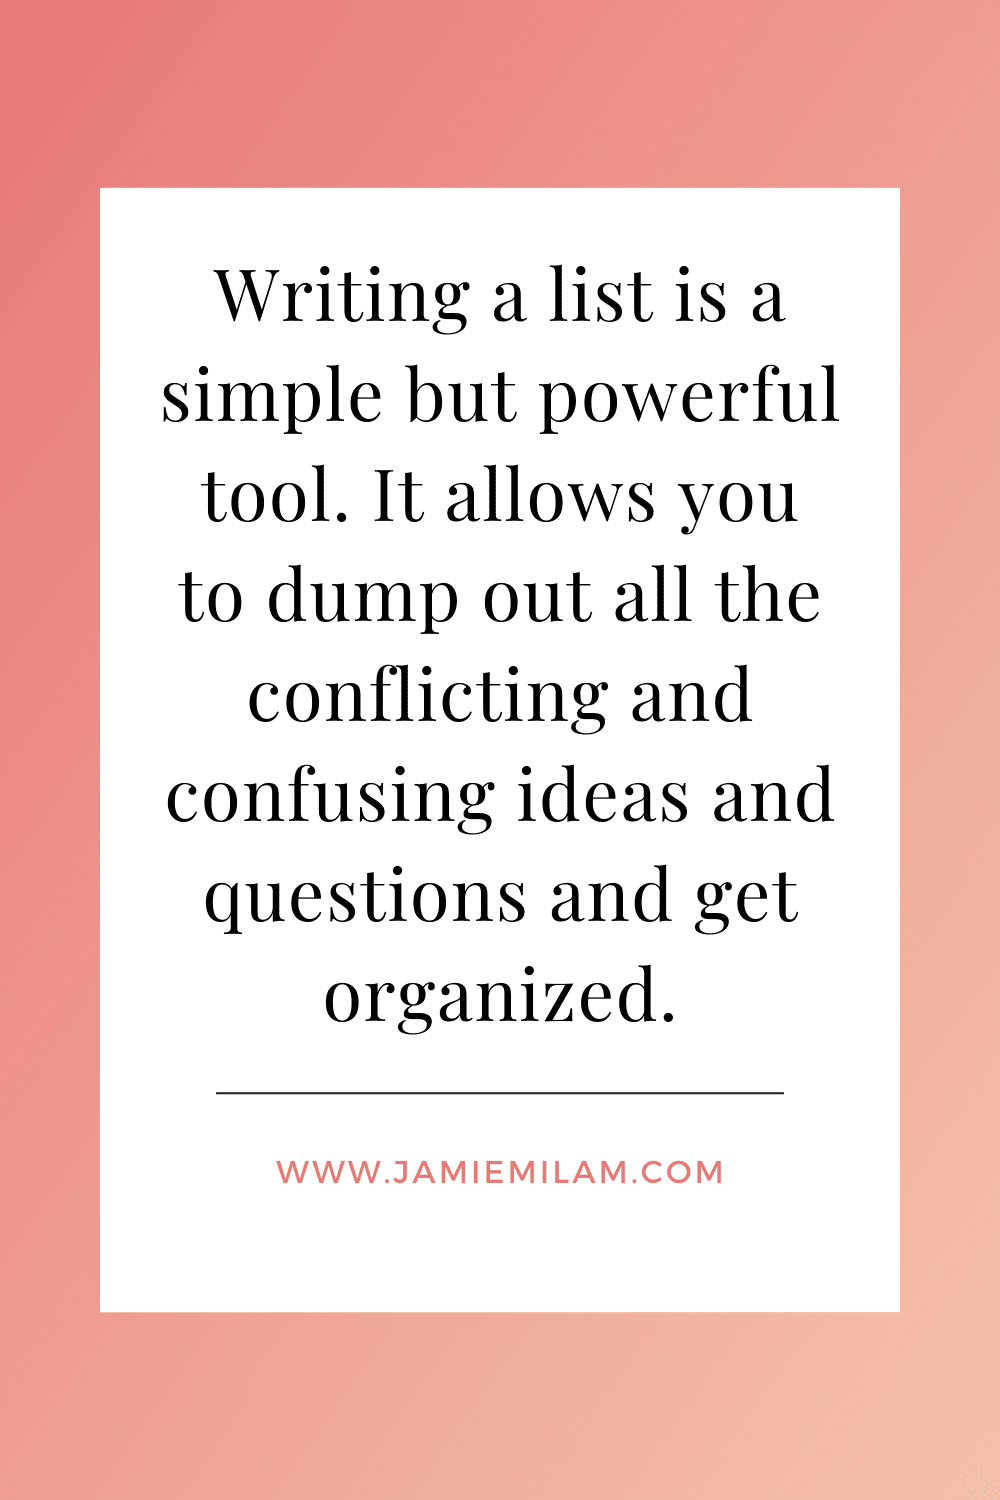 Text that says "Writing a list is a simple but powerful tool. It allows you to dump out all the conflicting and conusing ideas and questions and get organized."